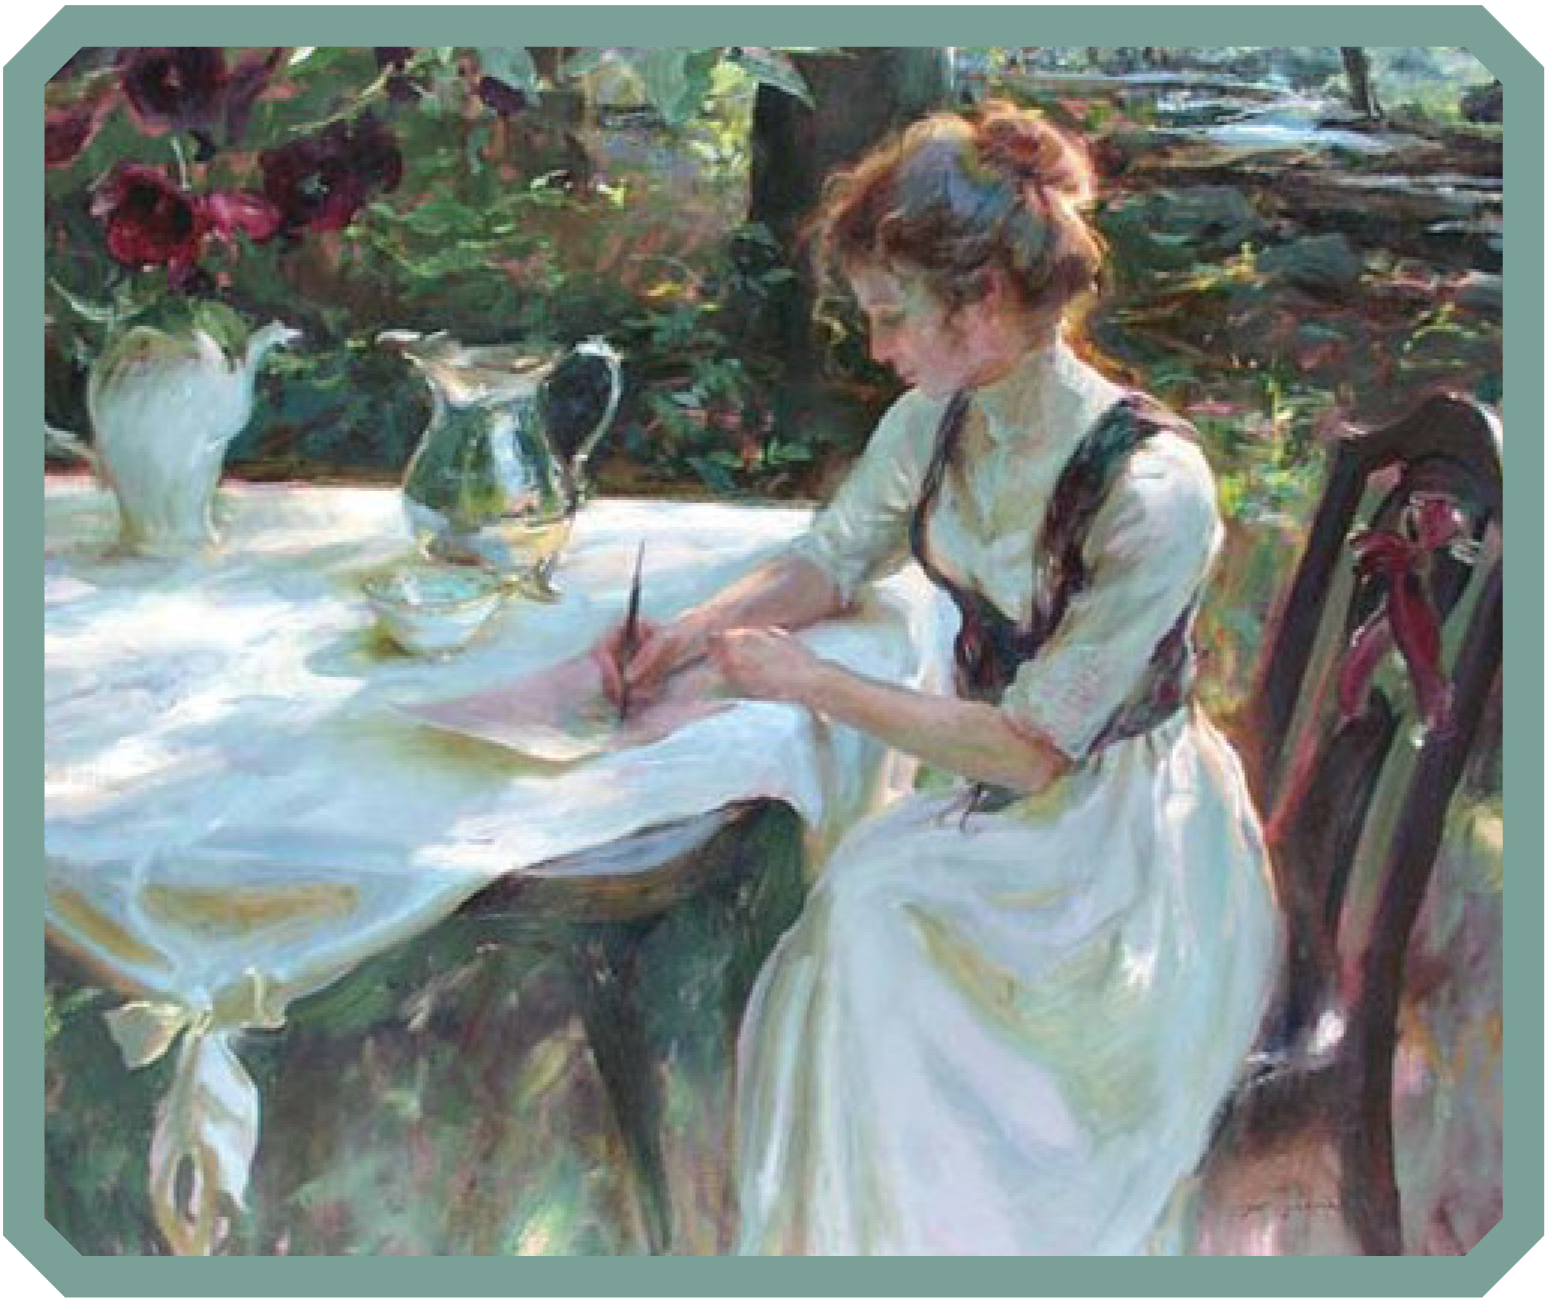 Woman write at table in garden